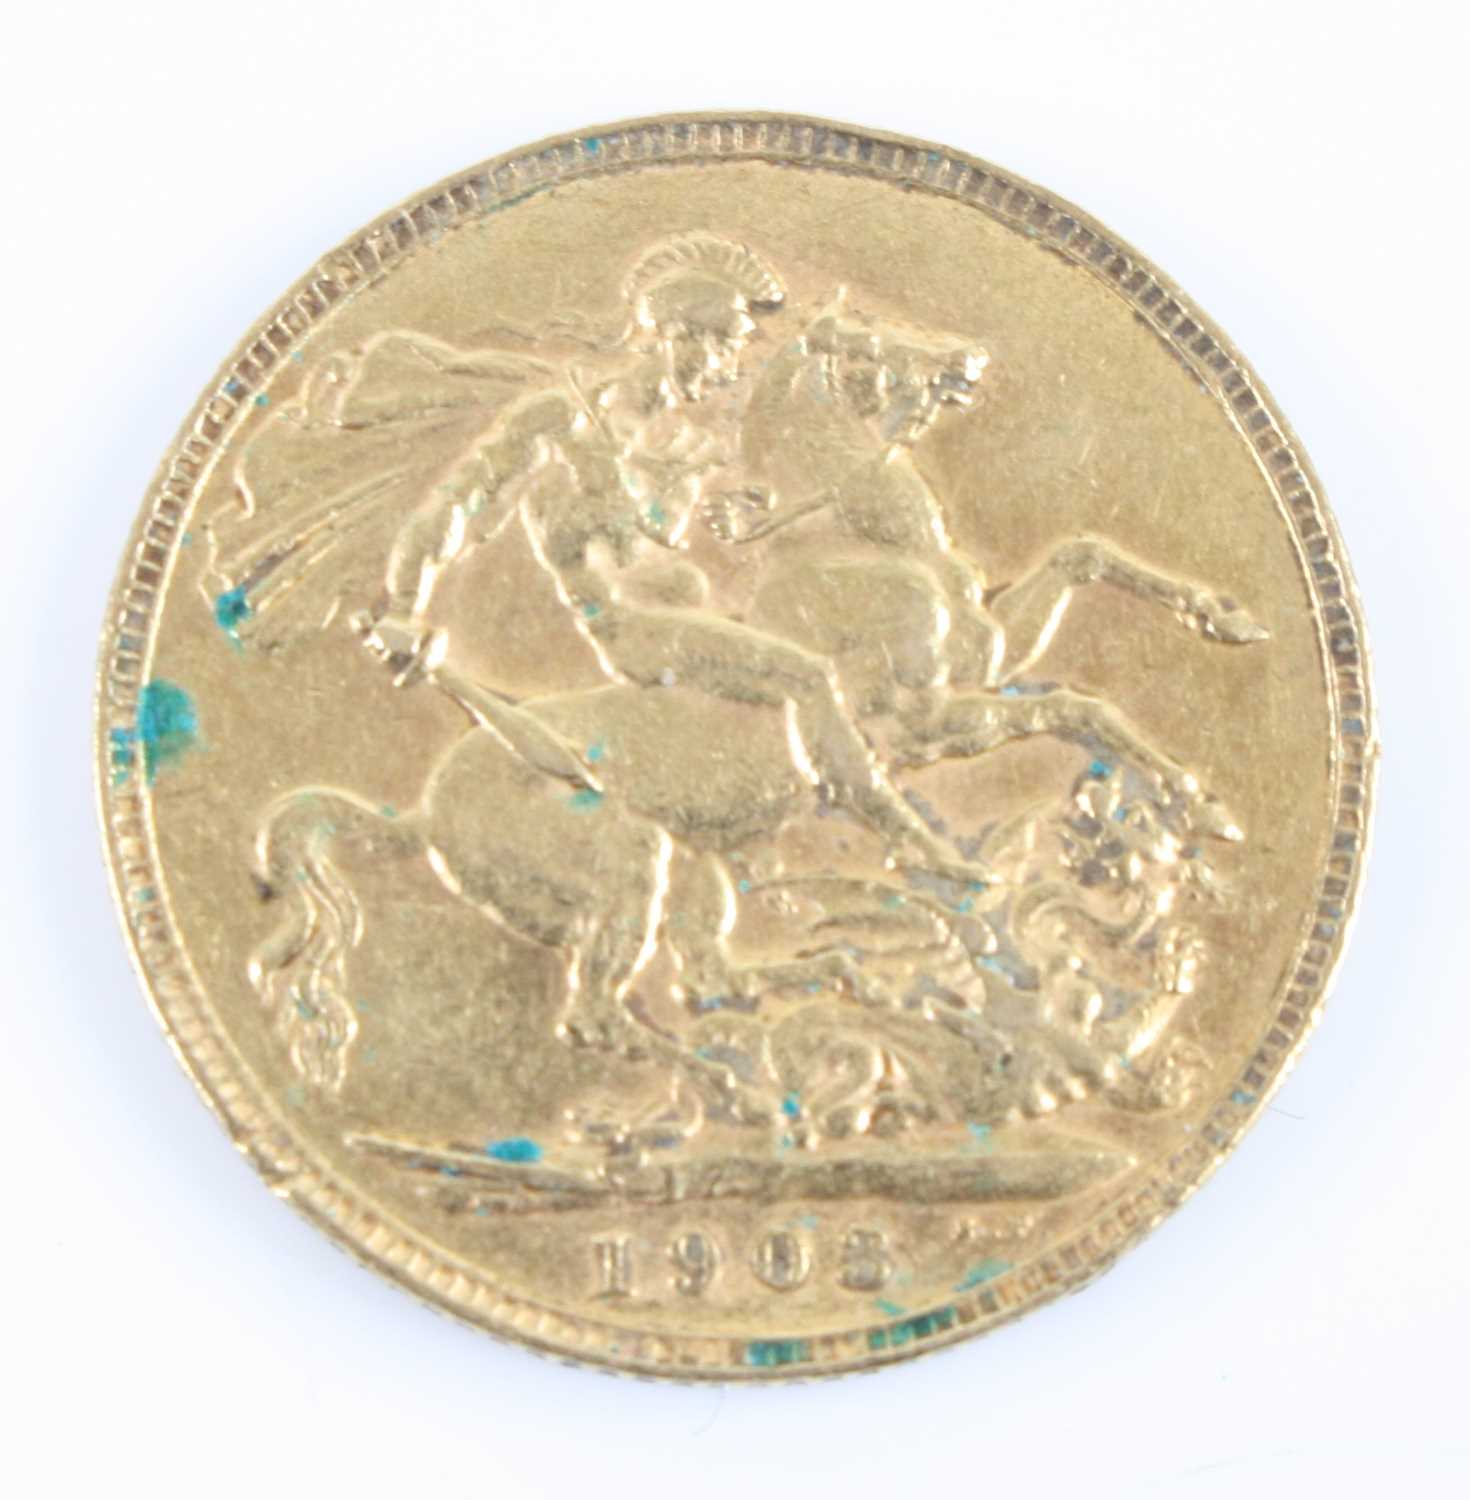 Great Britain, 1903 gold full sovereign, Edward VII, rev: St George and Dragon above date. (1) - Image 2 of 2